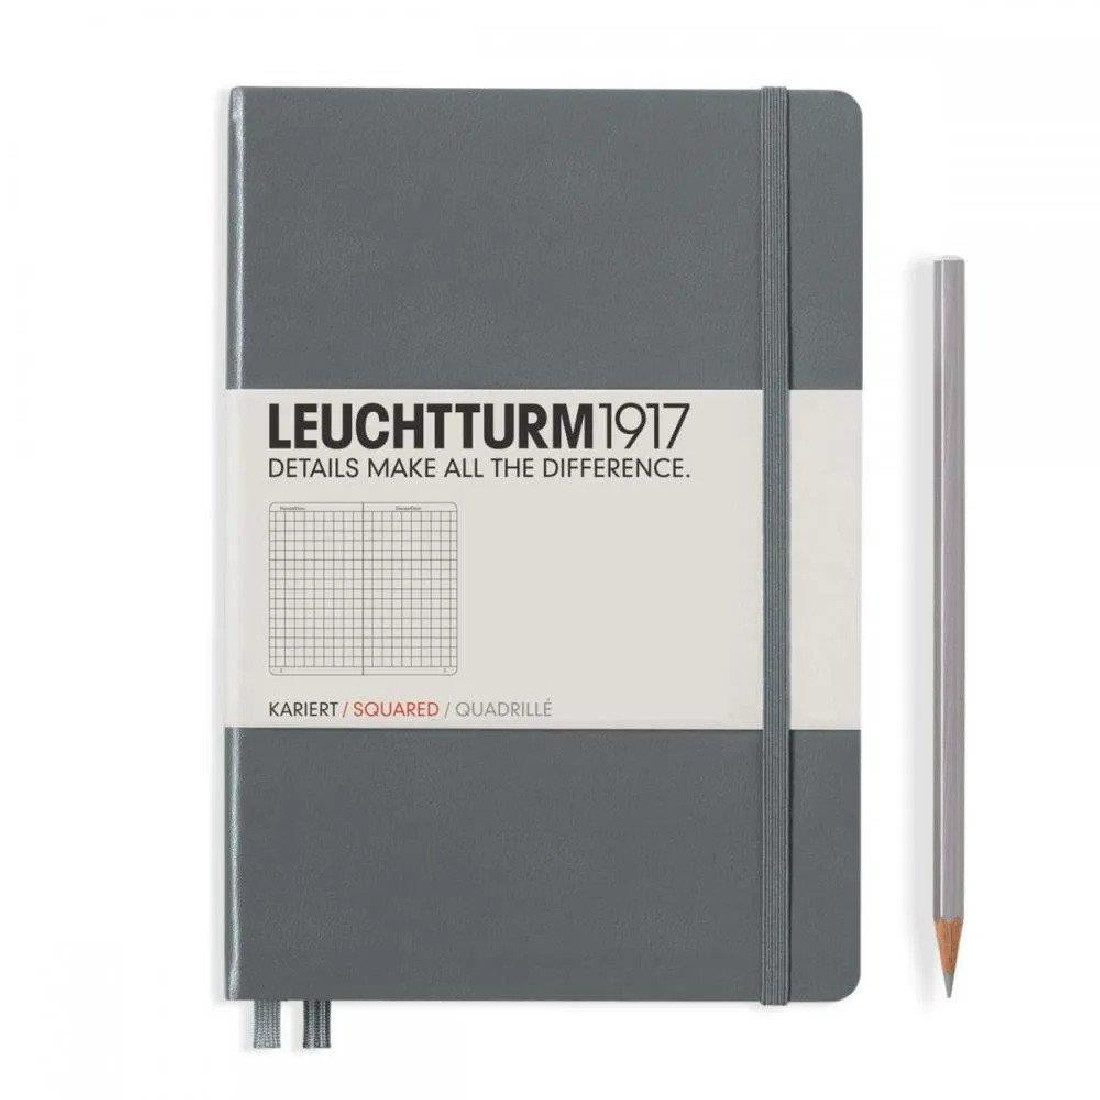 Leuchttrum 1917 Notebook A5 Hardcover, 251 numbered pages, Anthracite, squared